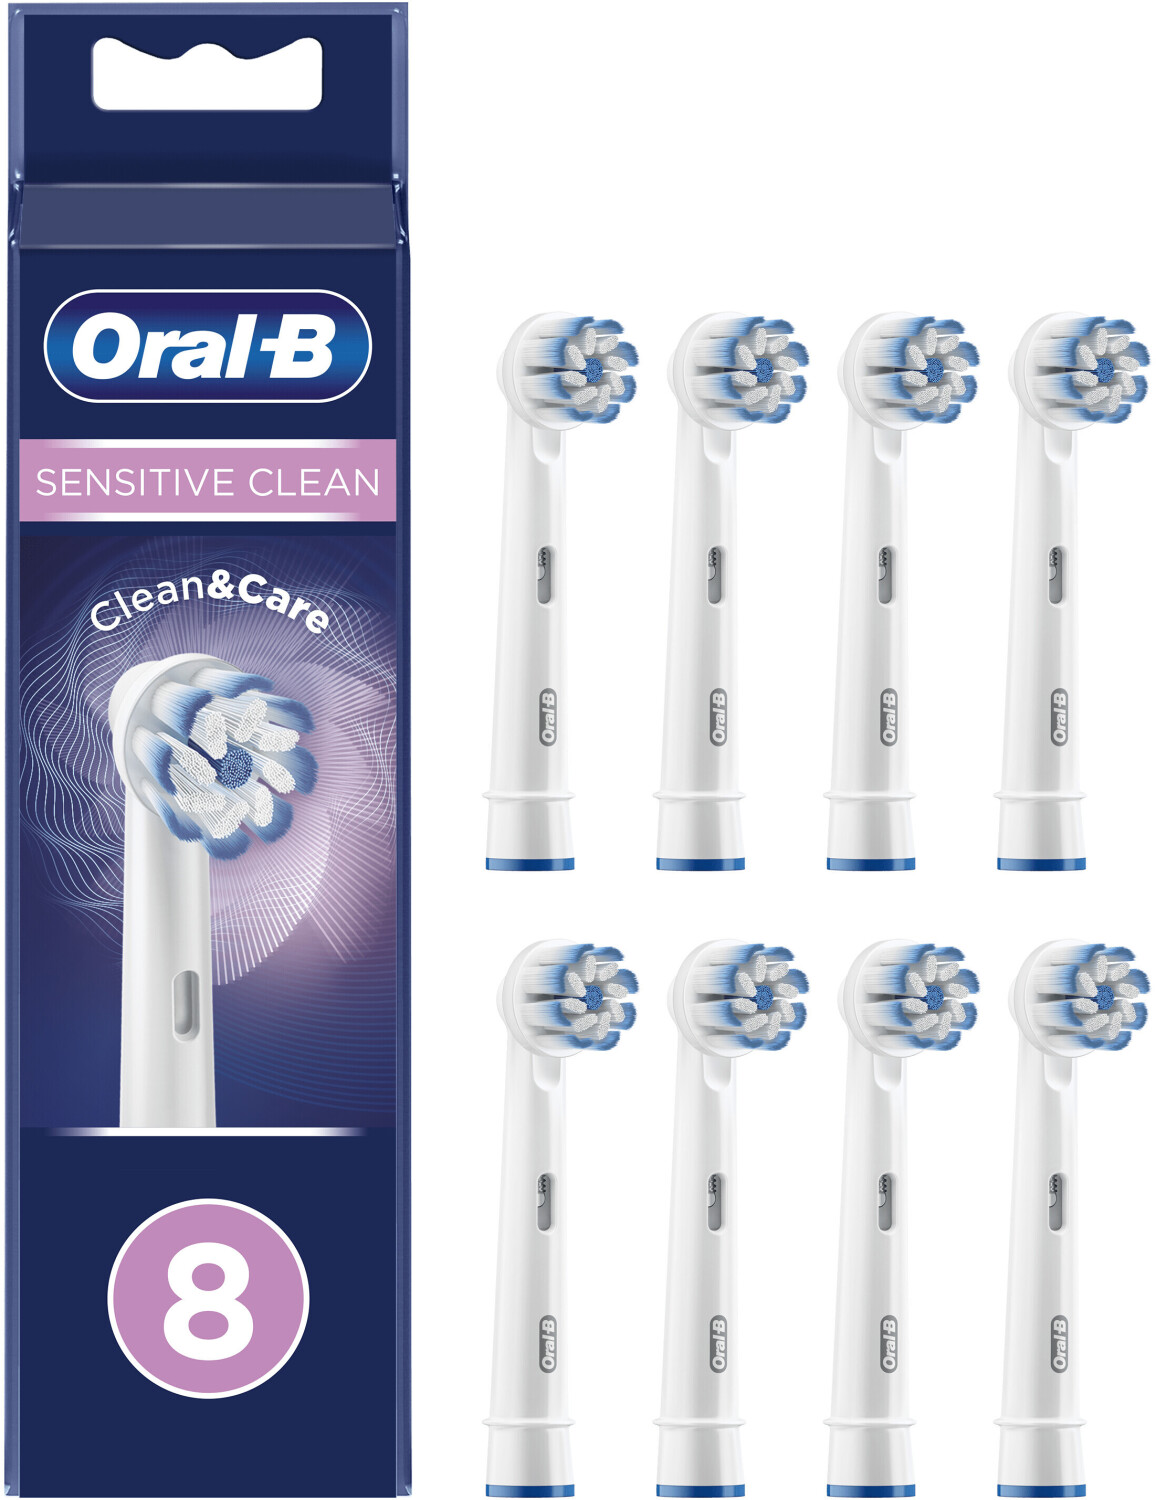 Photos - Electric Toothbrush Oral-B Sensitive Clean Clean&Care Replacement Brush  (8 pcs)